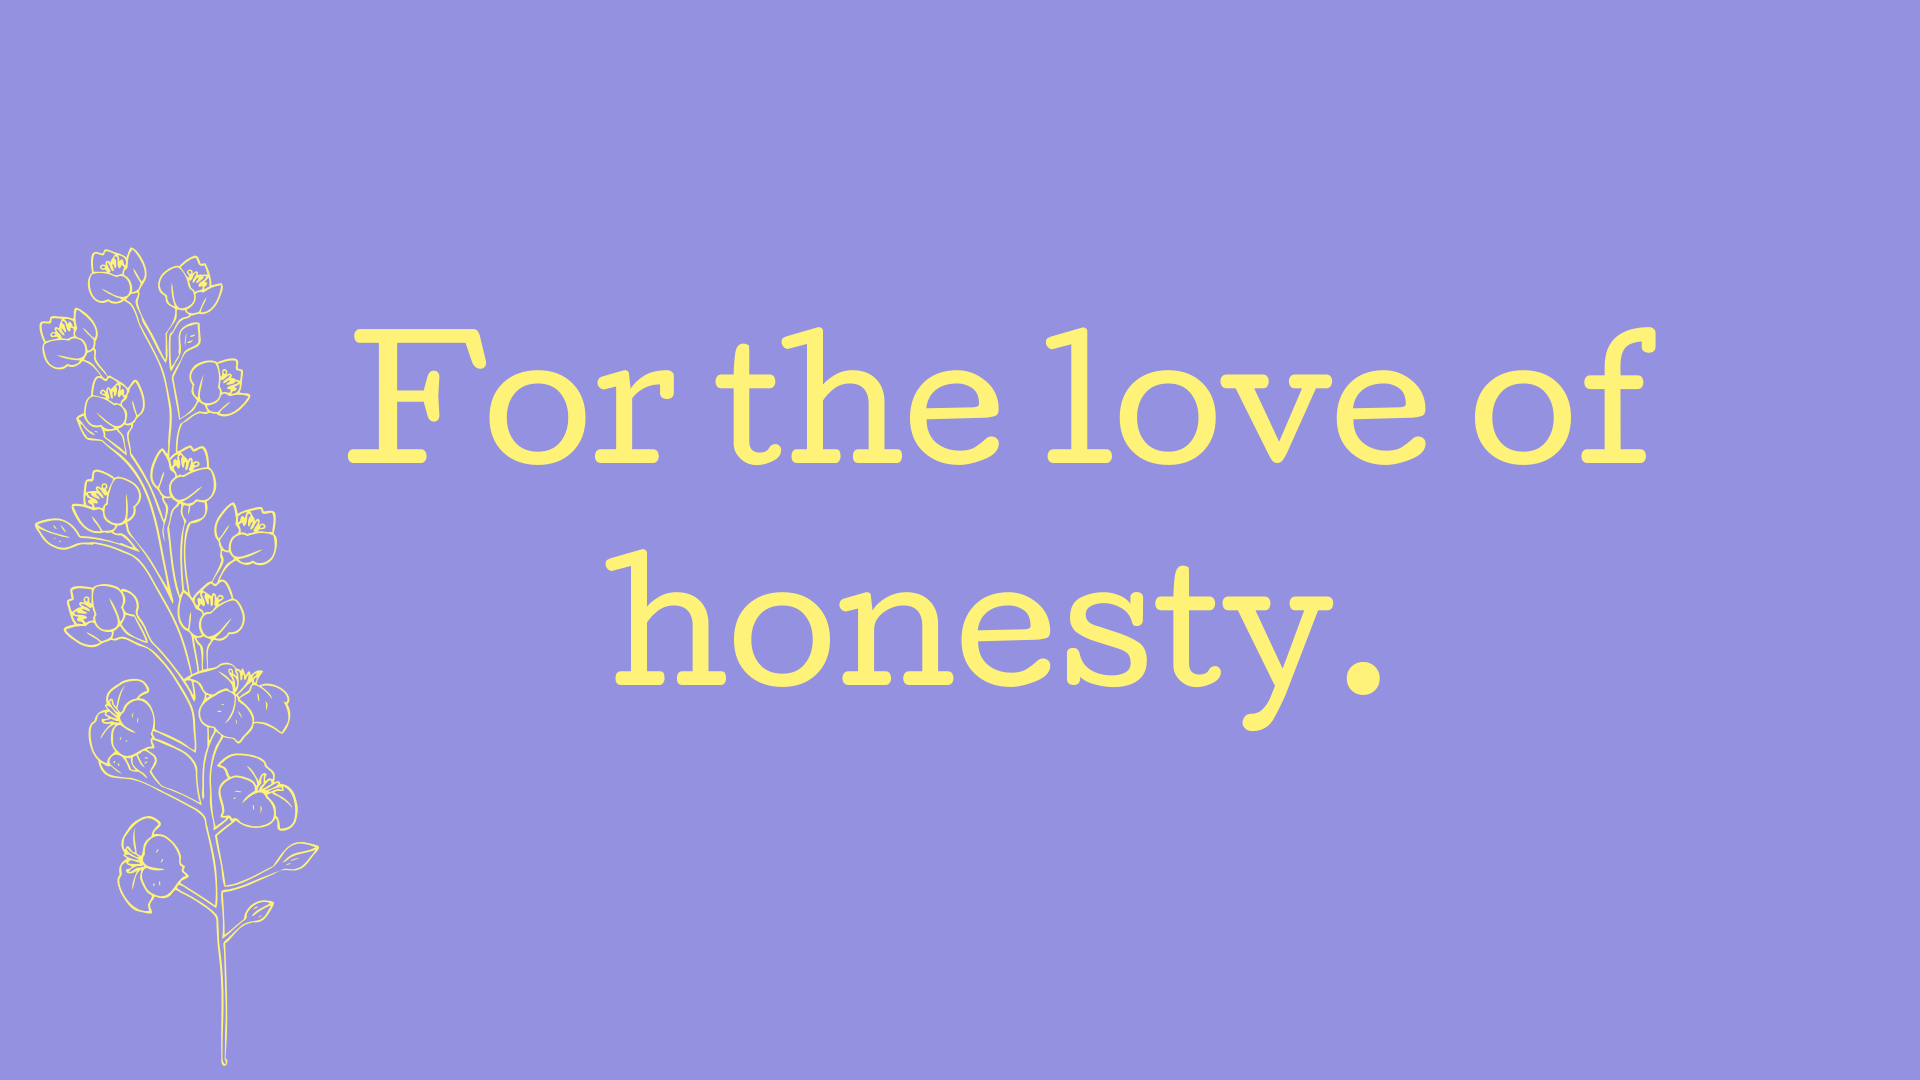 For the love of honesty.